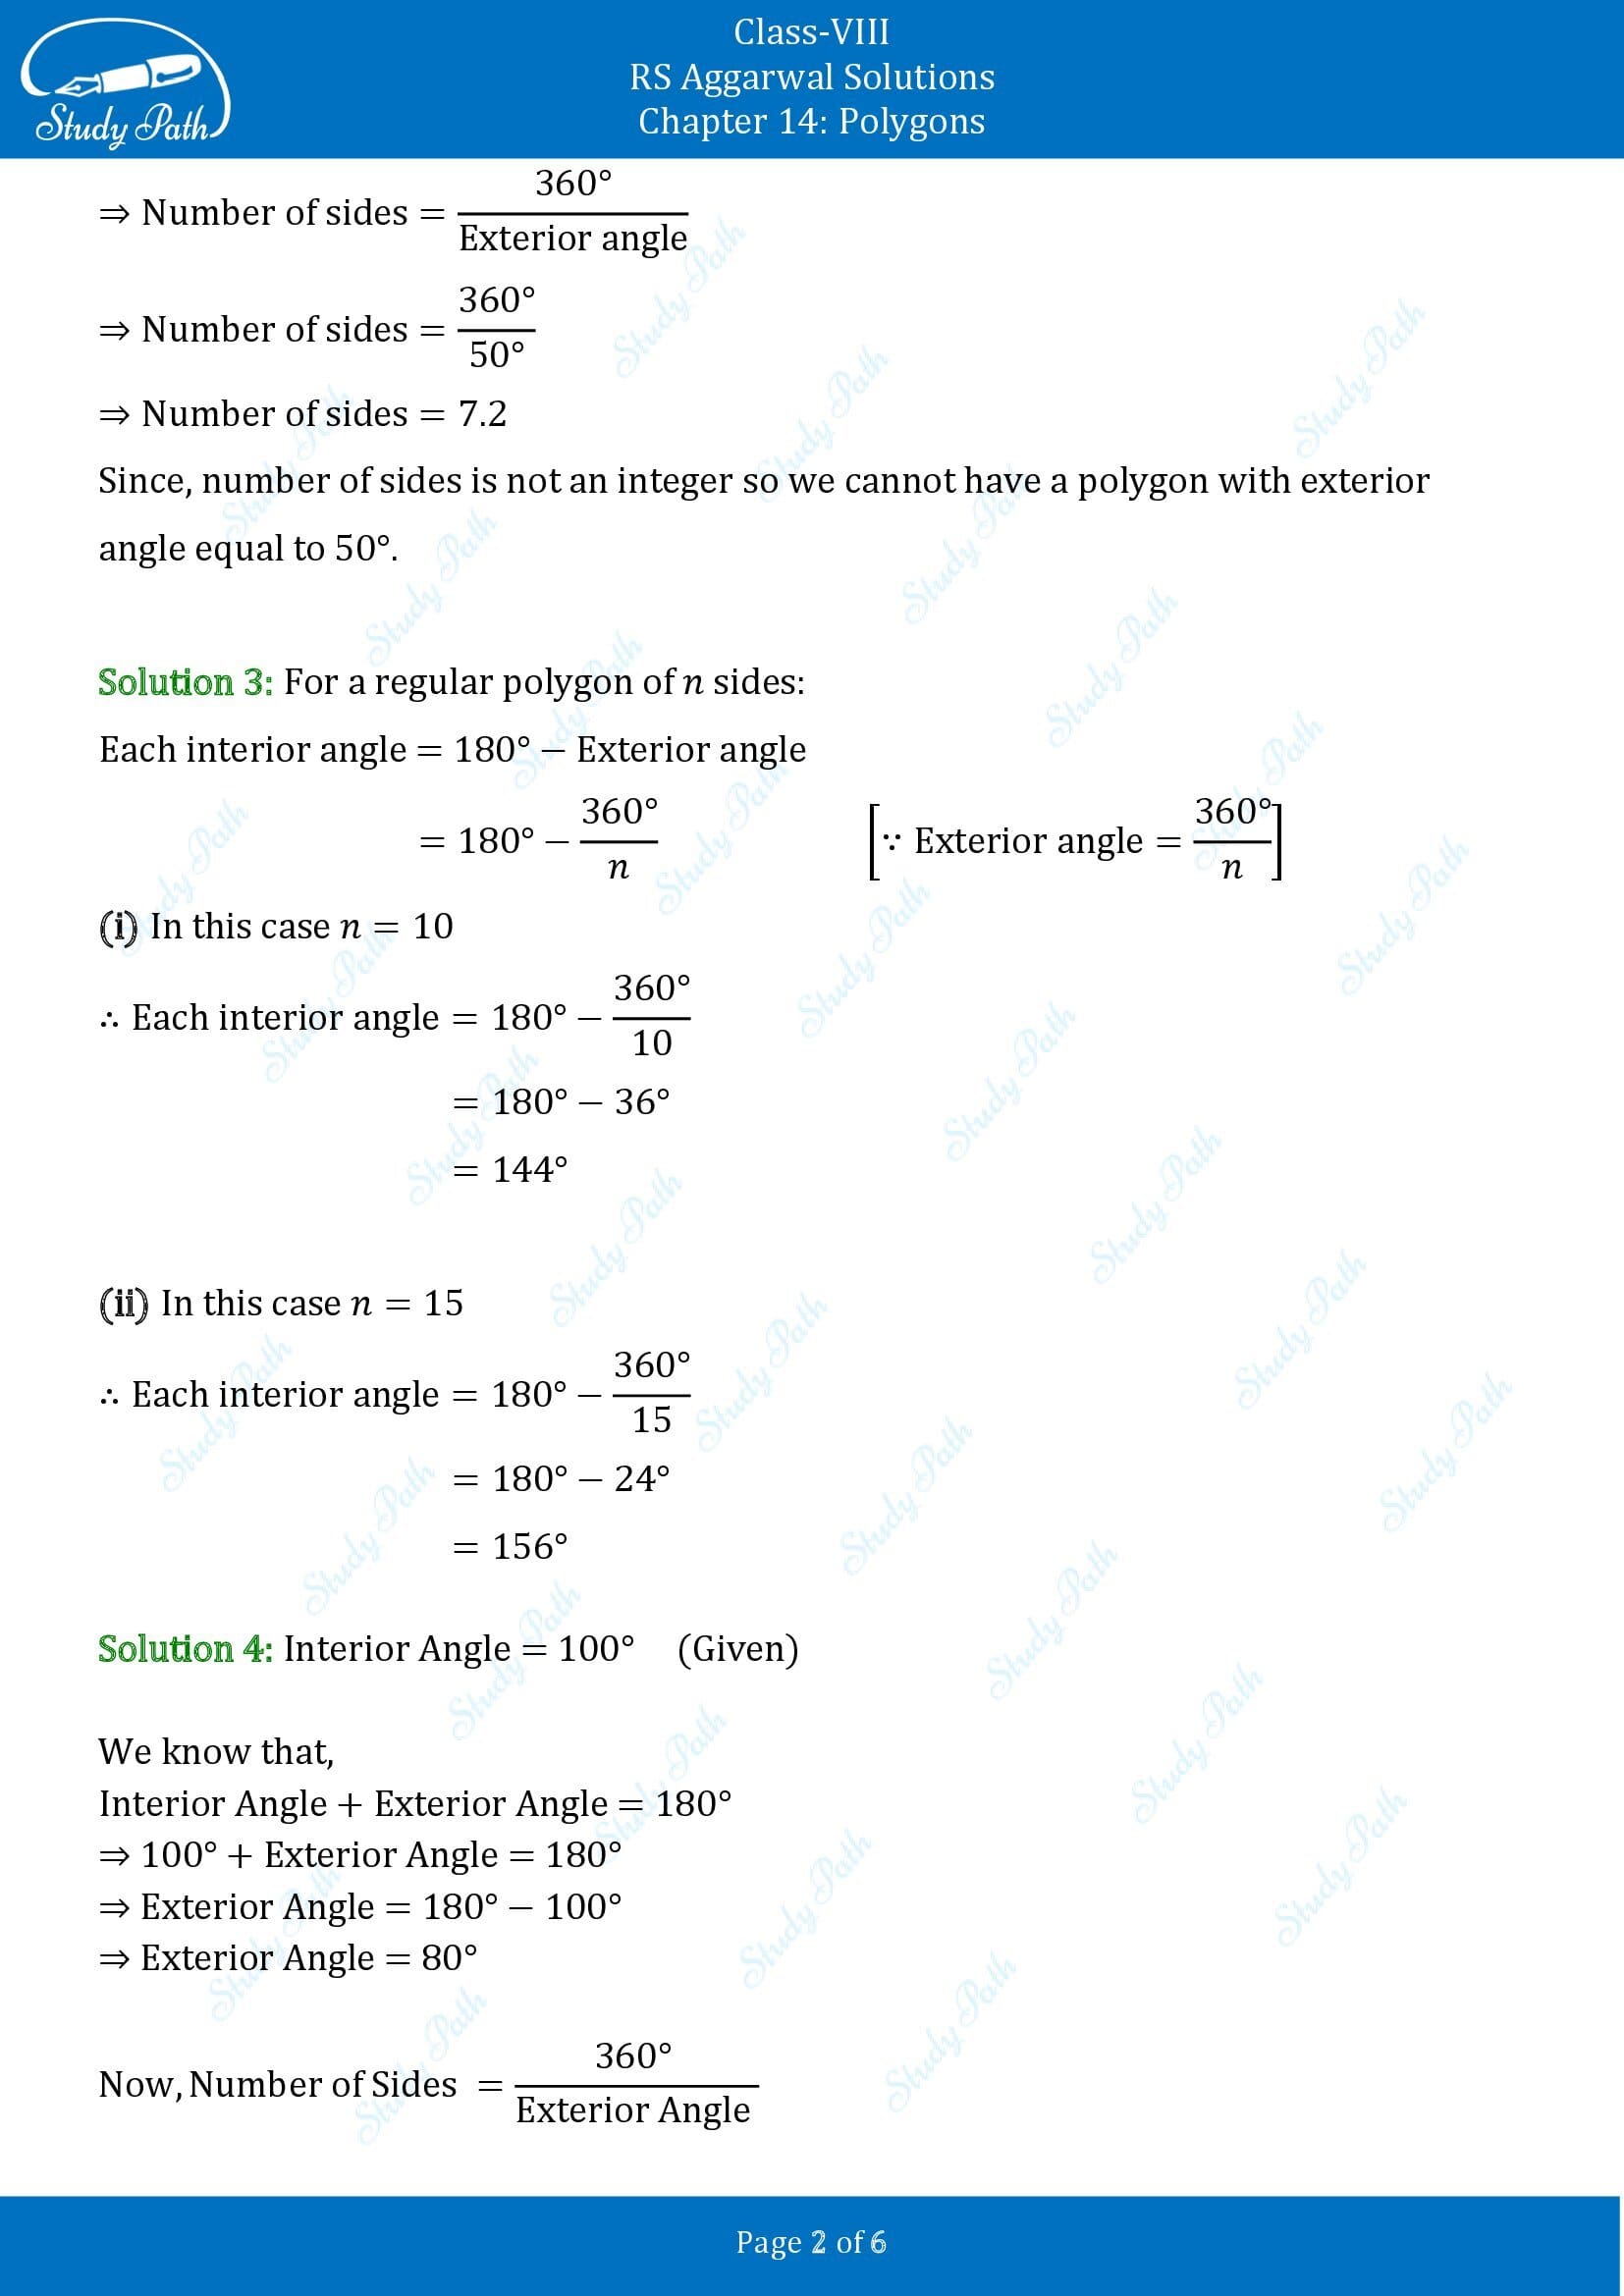 RS Aggarwal Solutions Class 8 Chapter 14 Polygons Exercise 14A 00002